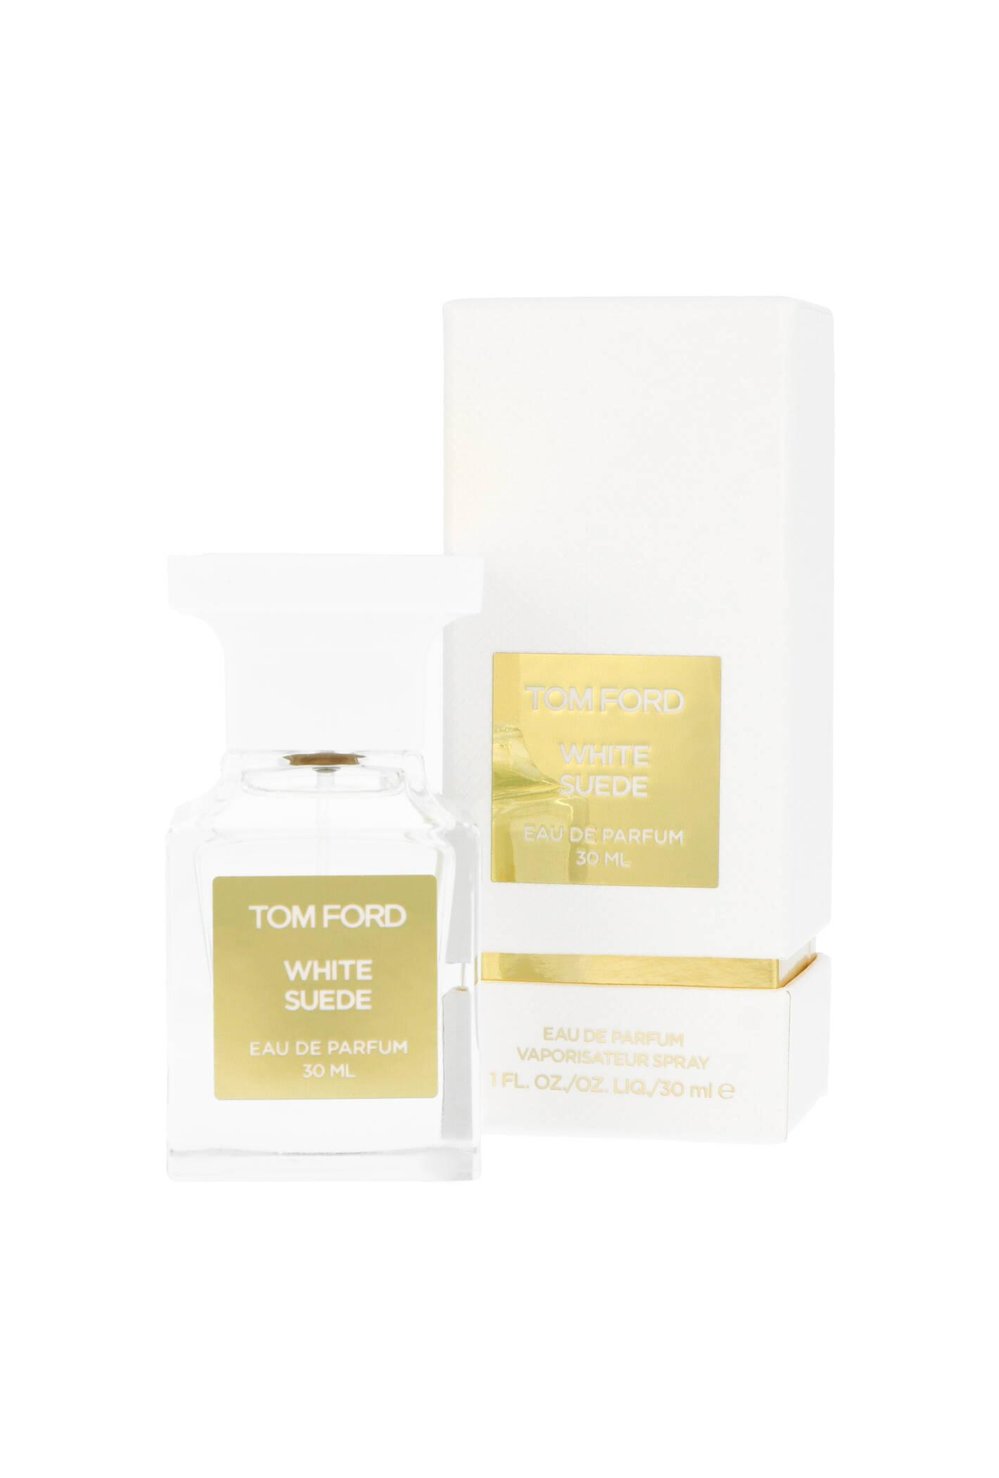 Tom Ford White Suede, edp 30ml